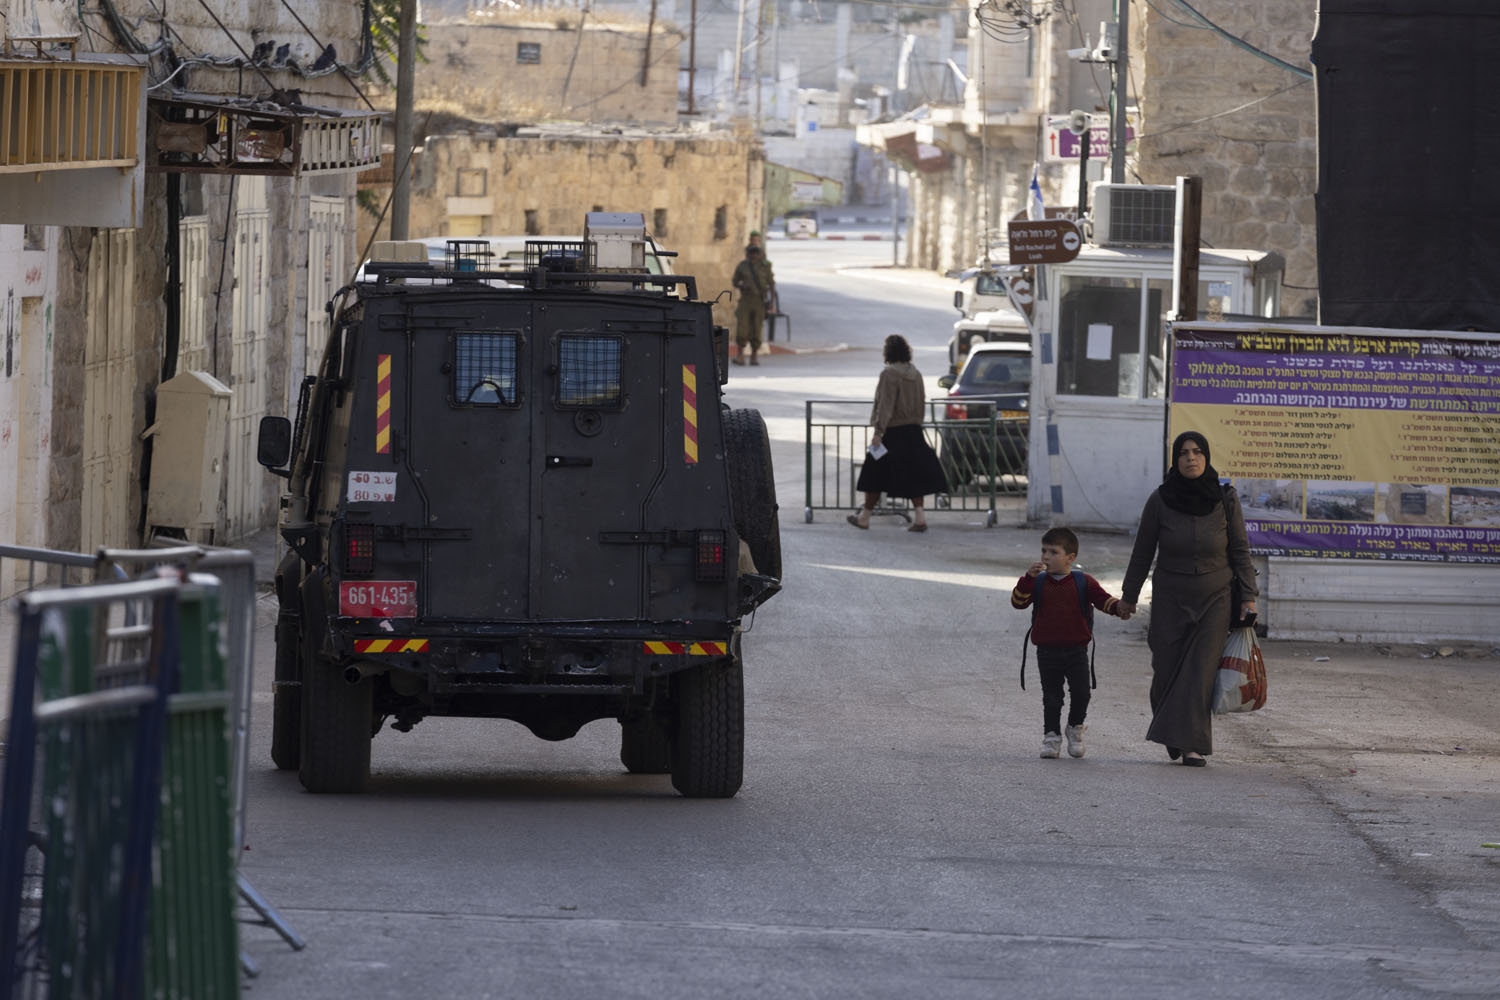 Palestinian mother and child walking next to an Israeli military jeep in Hebron, West Bank, Nov. 28, 2021. (Oren Ziv)